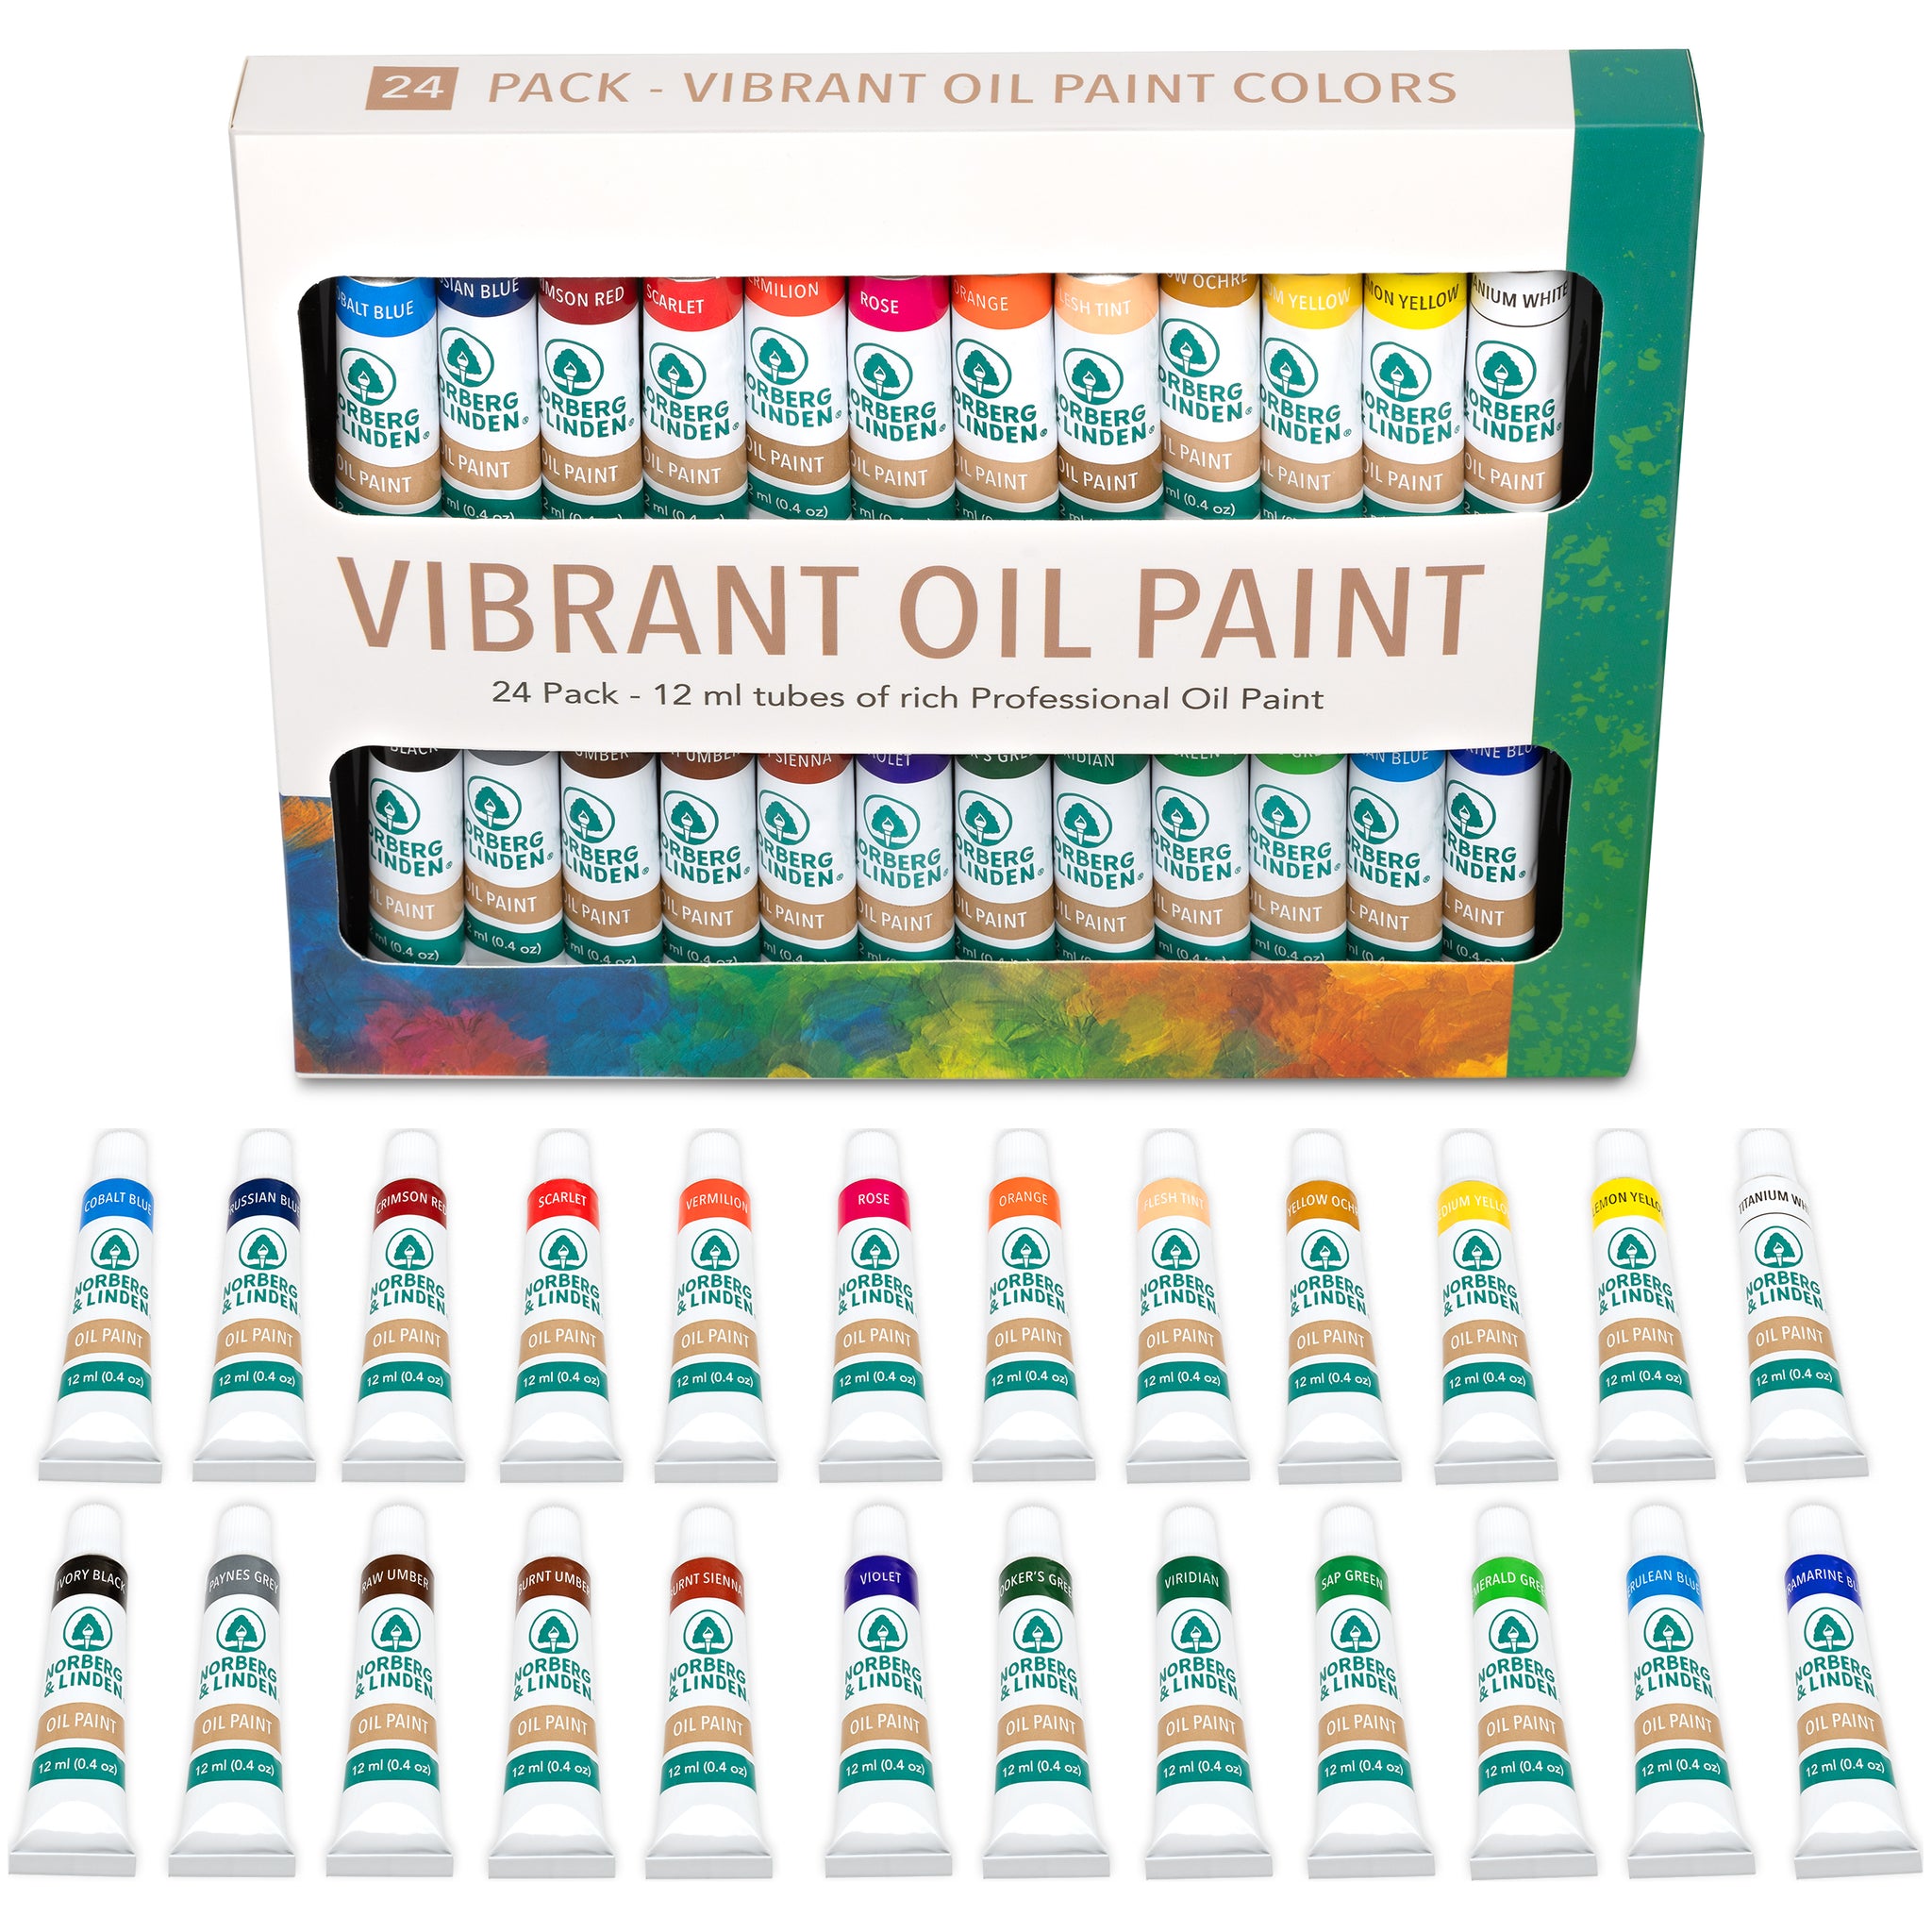  Oil Paint Set - 32 Color Painting Set for Artists, Adults &  Kids. Complete Collection of Pigment Rich Oil Based Paints. Art Supplies Kit  w/ 12 ml Tube Colors 